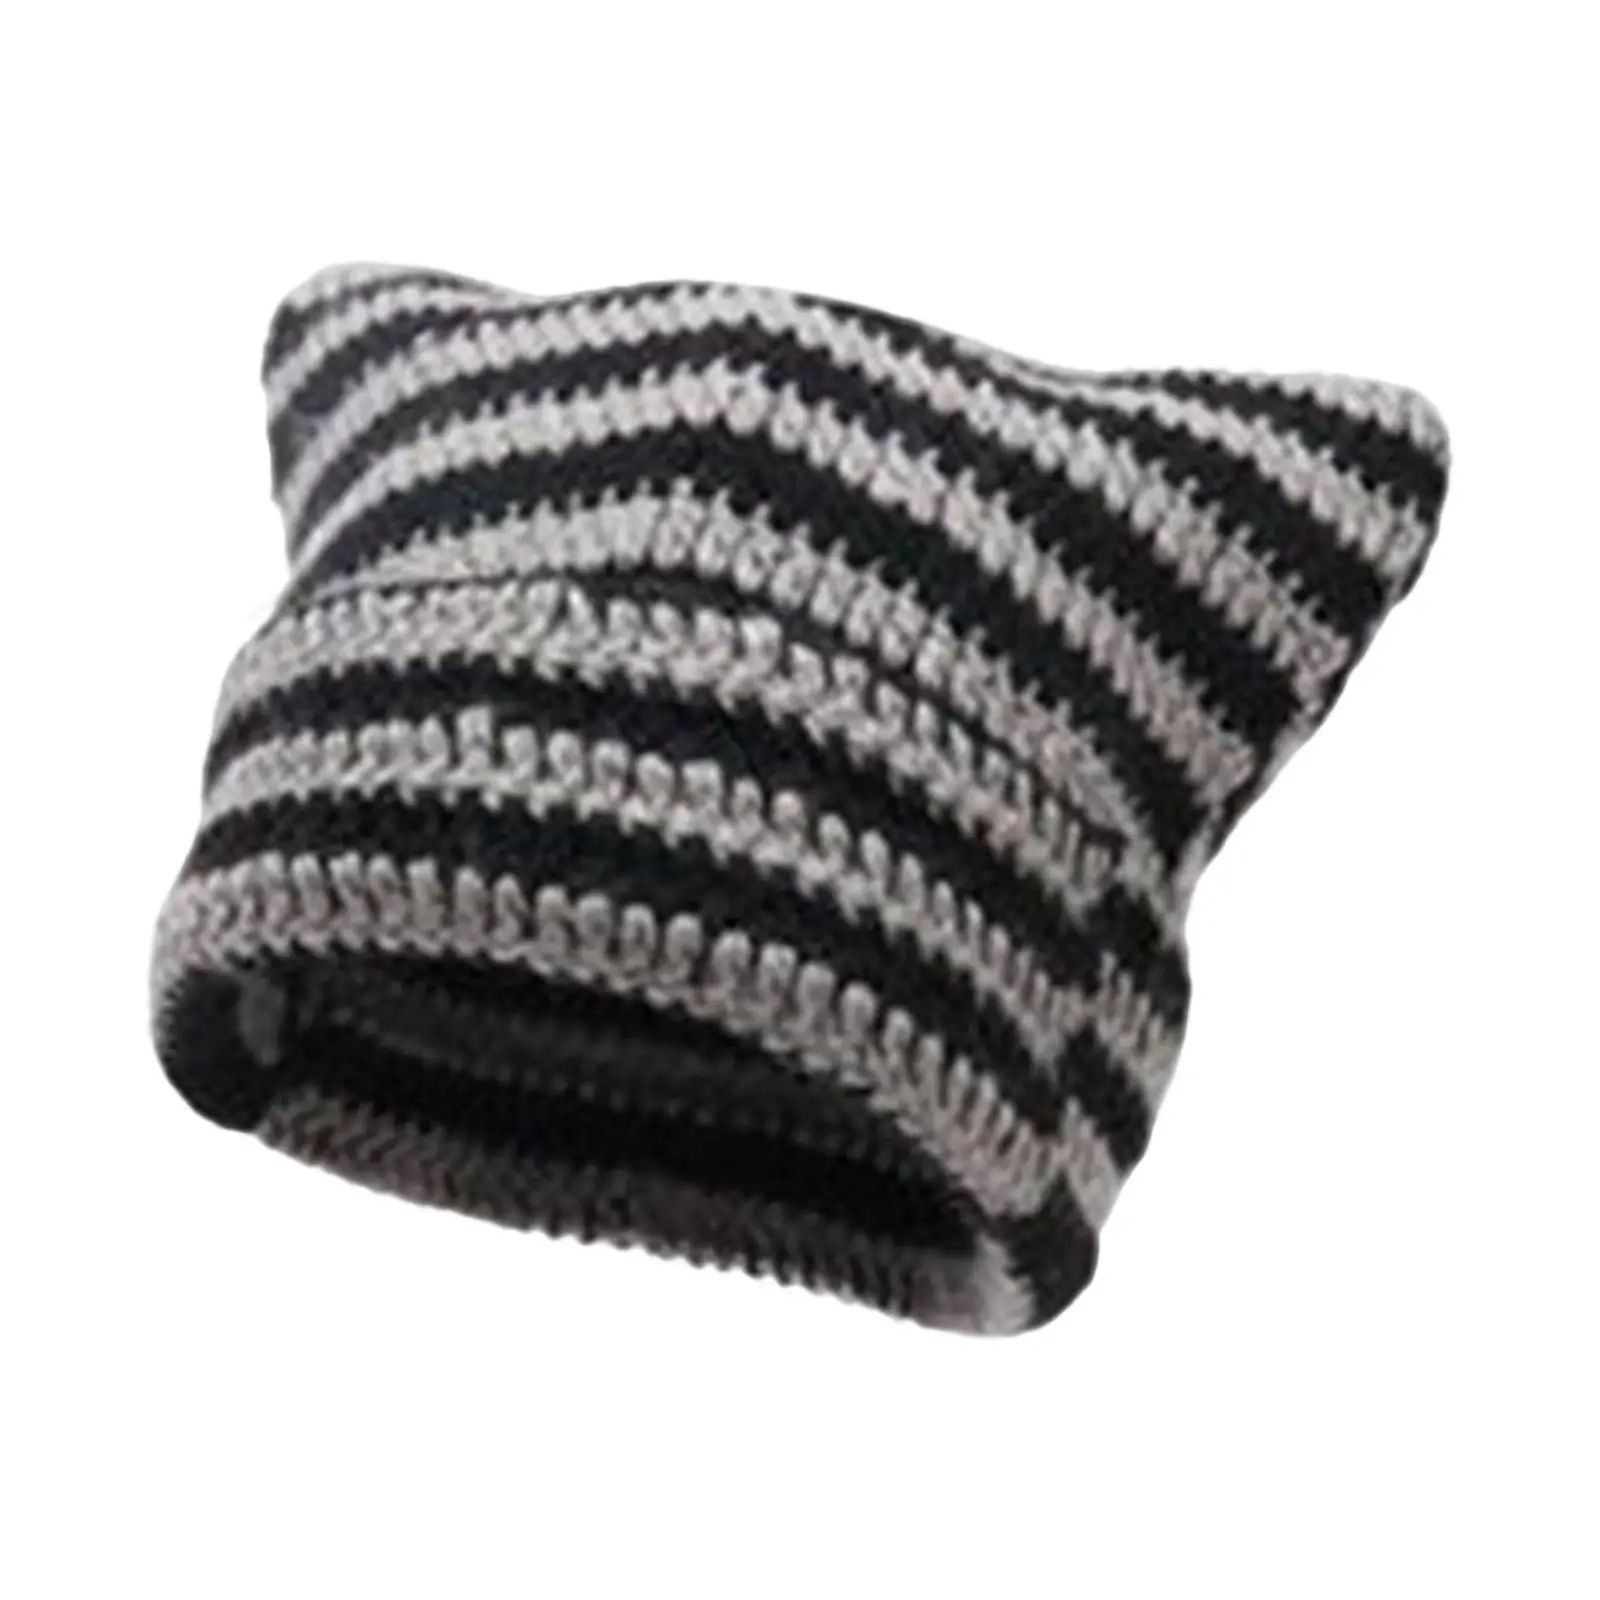 Winter Crochet Hat Knitted Cap Fashion Headwear Soft Handmade Vintage Style Clothing Photo Props Striped Women Beanie for Female